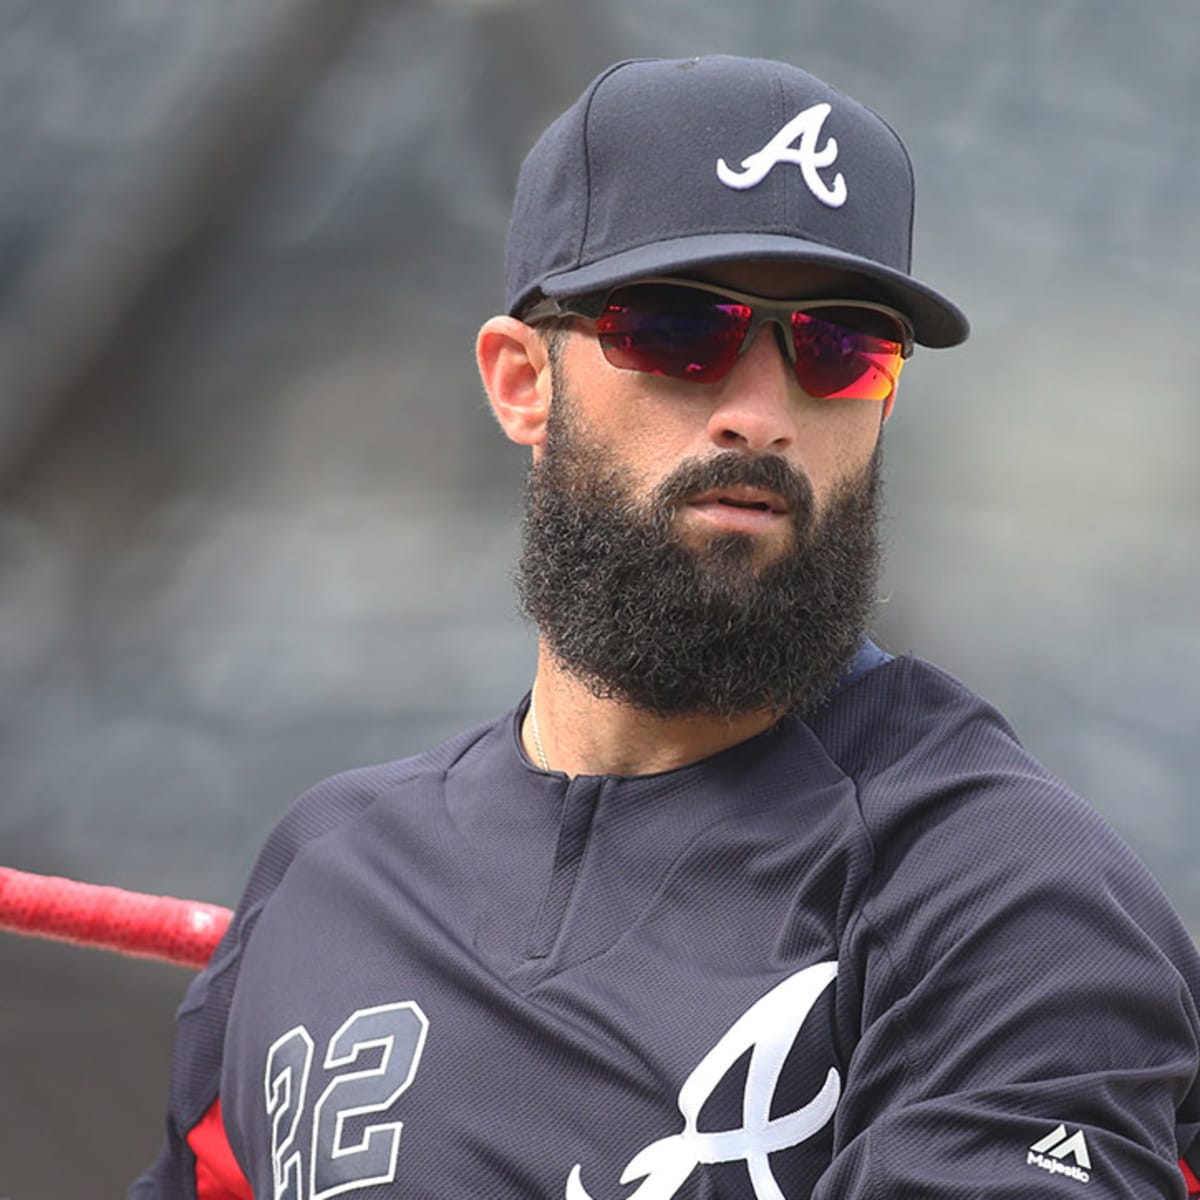 Nick Markakis says every Astro 'needs a beating' for stealing signs -  Sports Illustrated